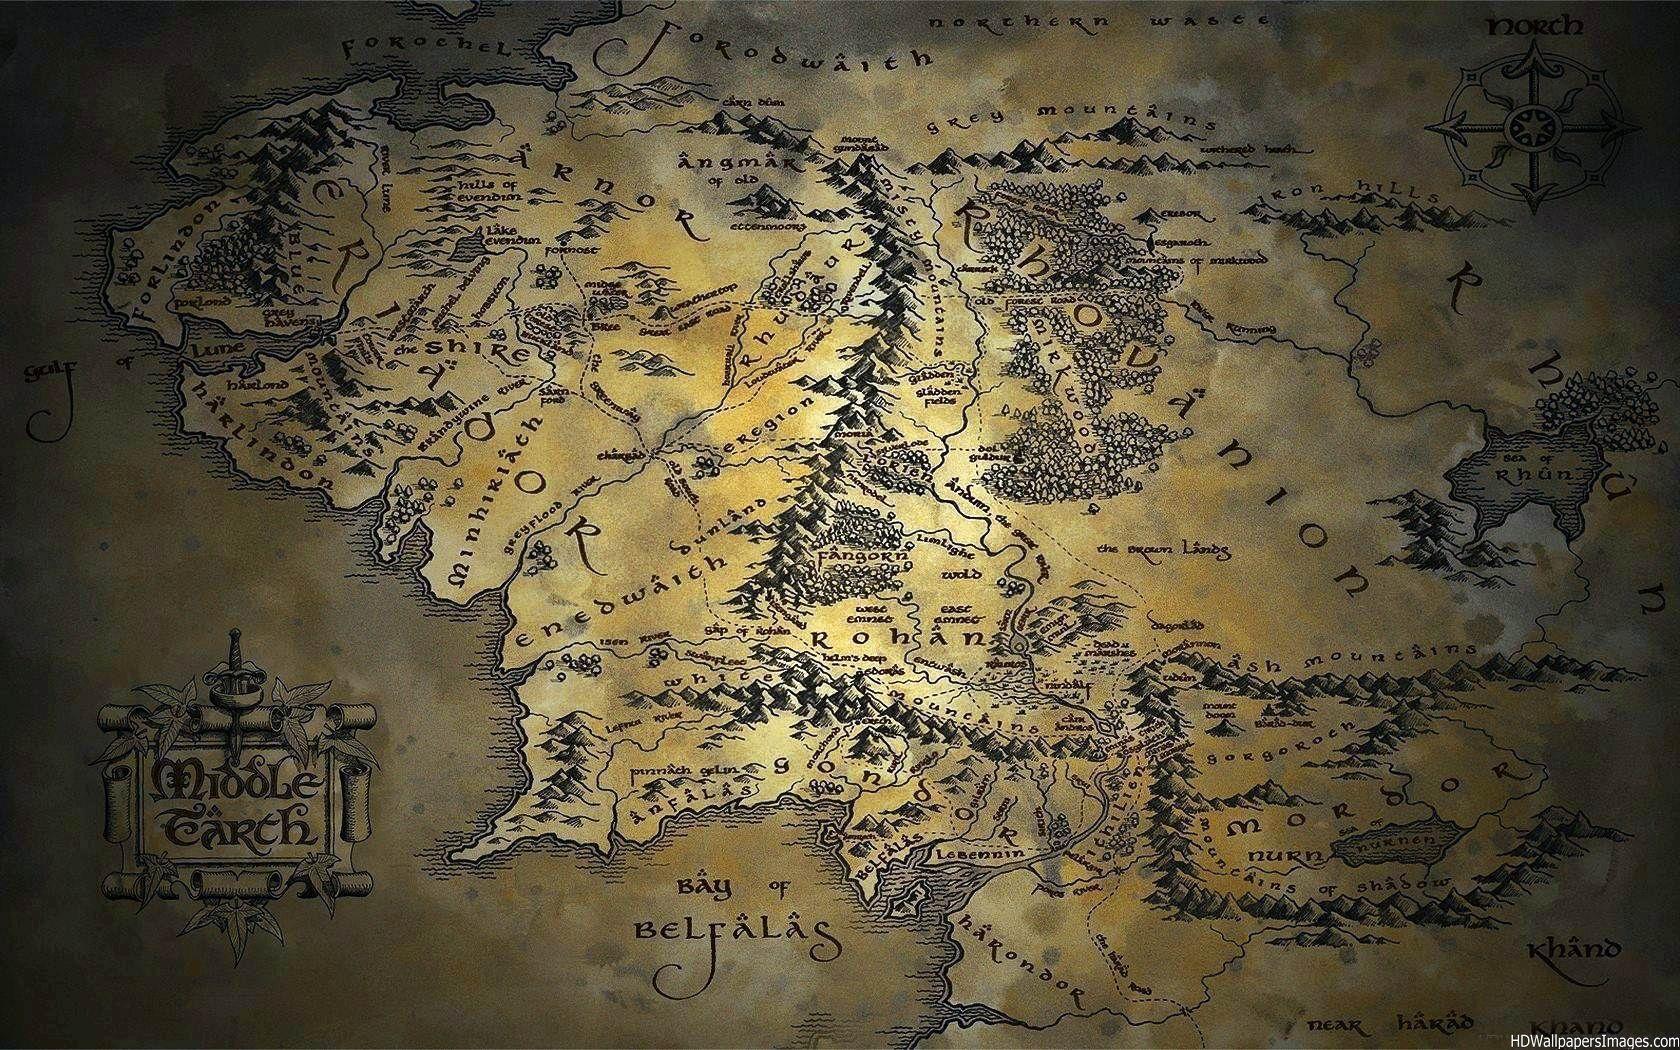 Middle Earth Map Image. HD Wallpaper Image